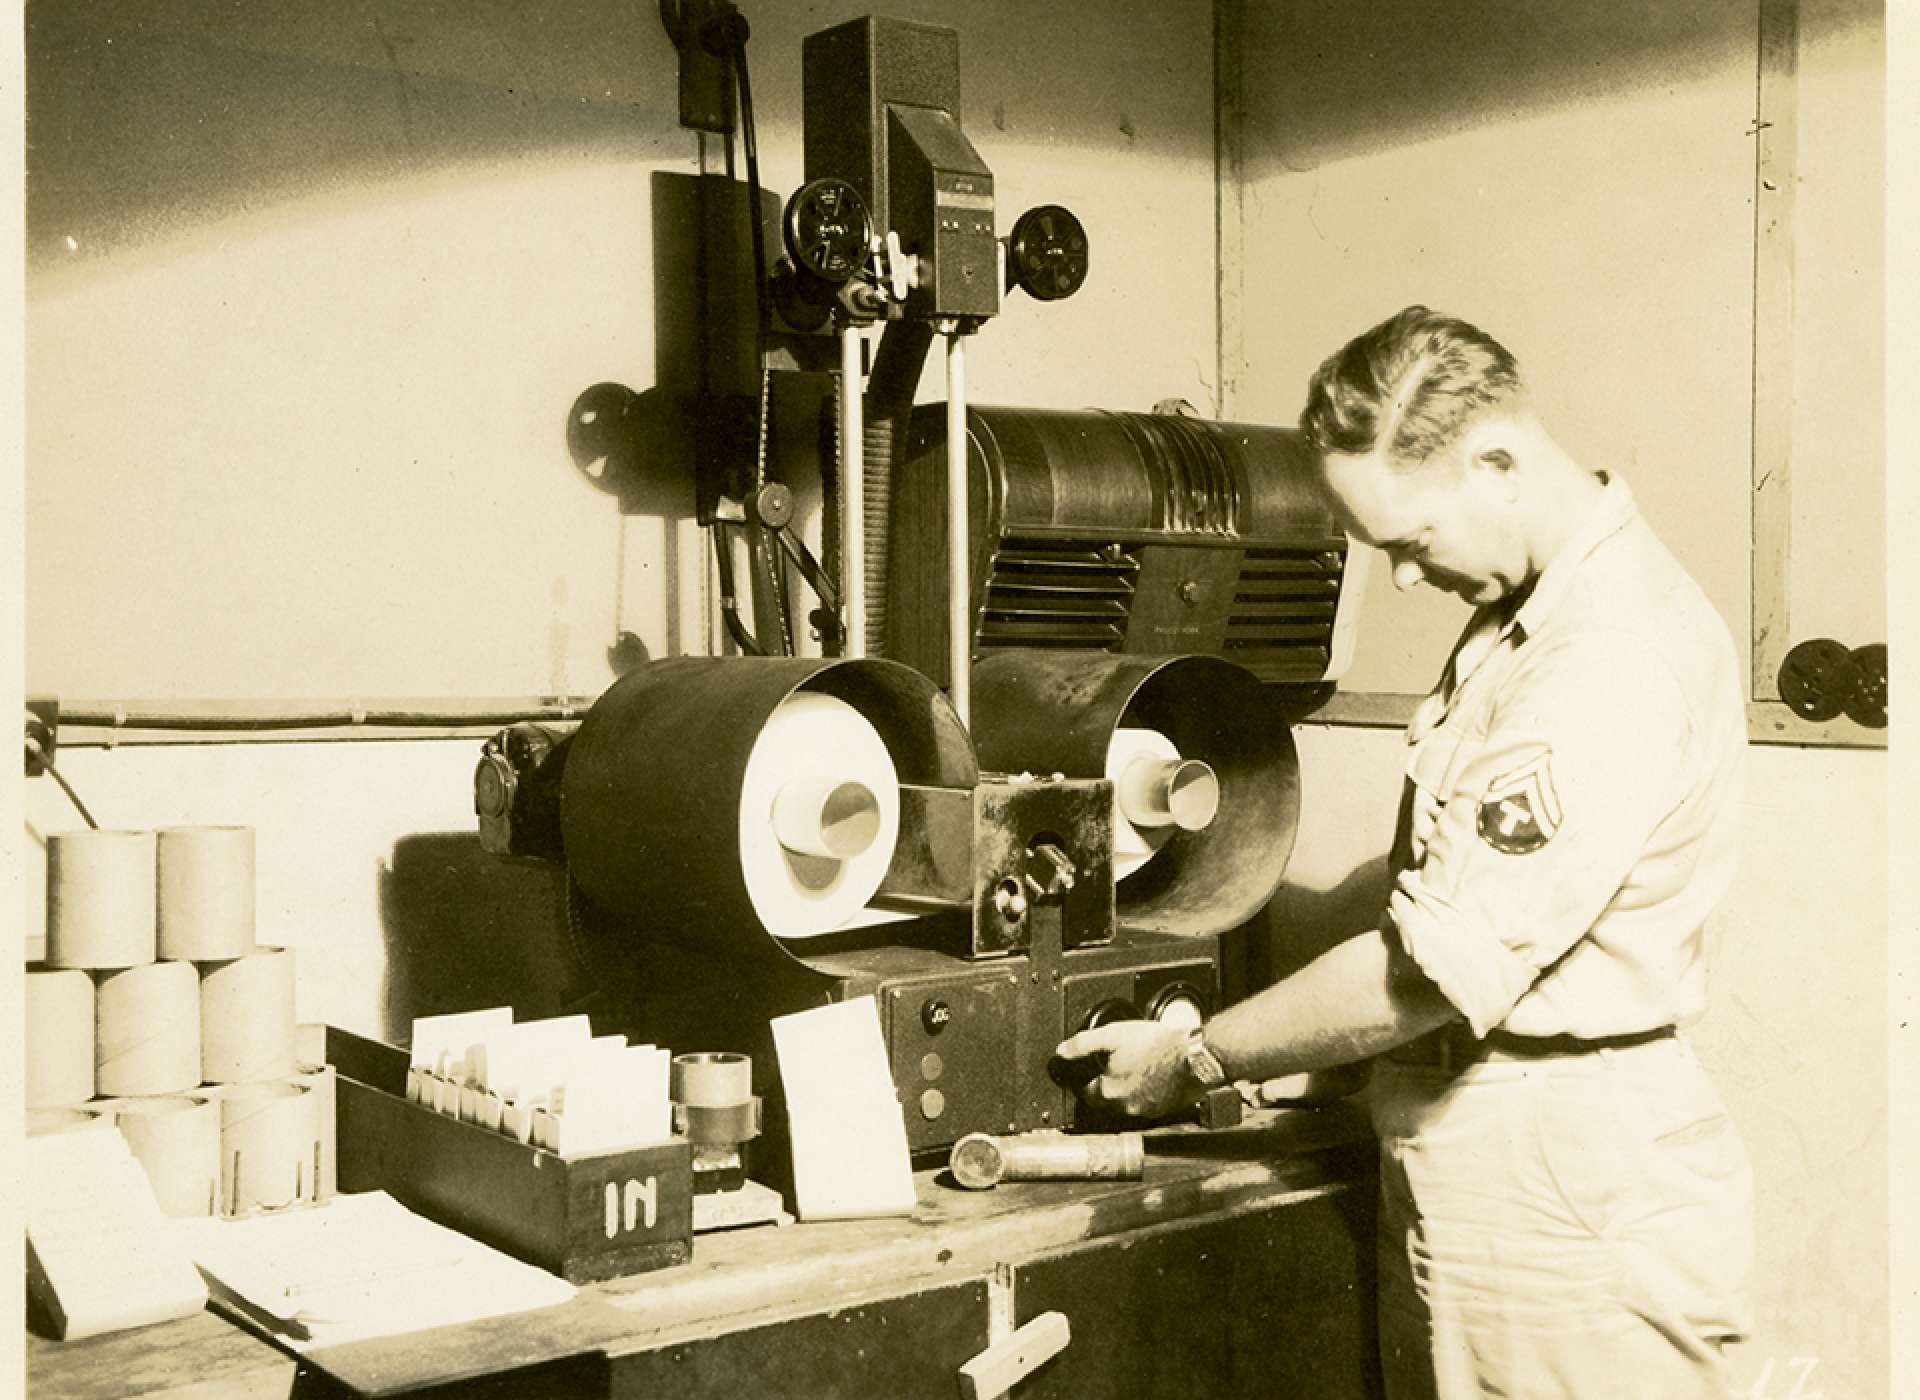 V-mail operation in the field at APO 929.”View of the continuous enlarger on which the image on the film is enlarged to regular V-Mail size of 4¼  x 5 inches. Sensitized rolls of paper, 825 feet in length are used. Here, the operator is adjusting the voltage to secure proper exposure. This is determined by consulting a chart which suggests certain voltage and lens aperture settings for any given film density.”